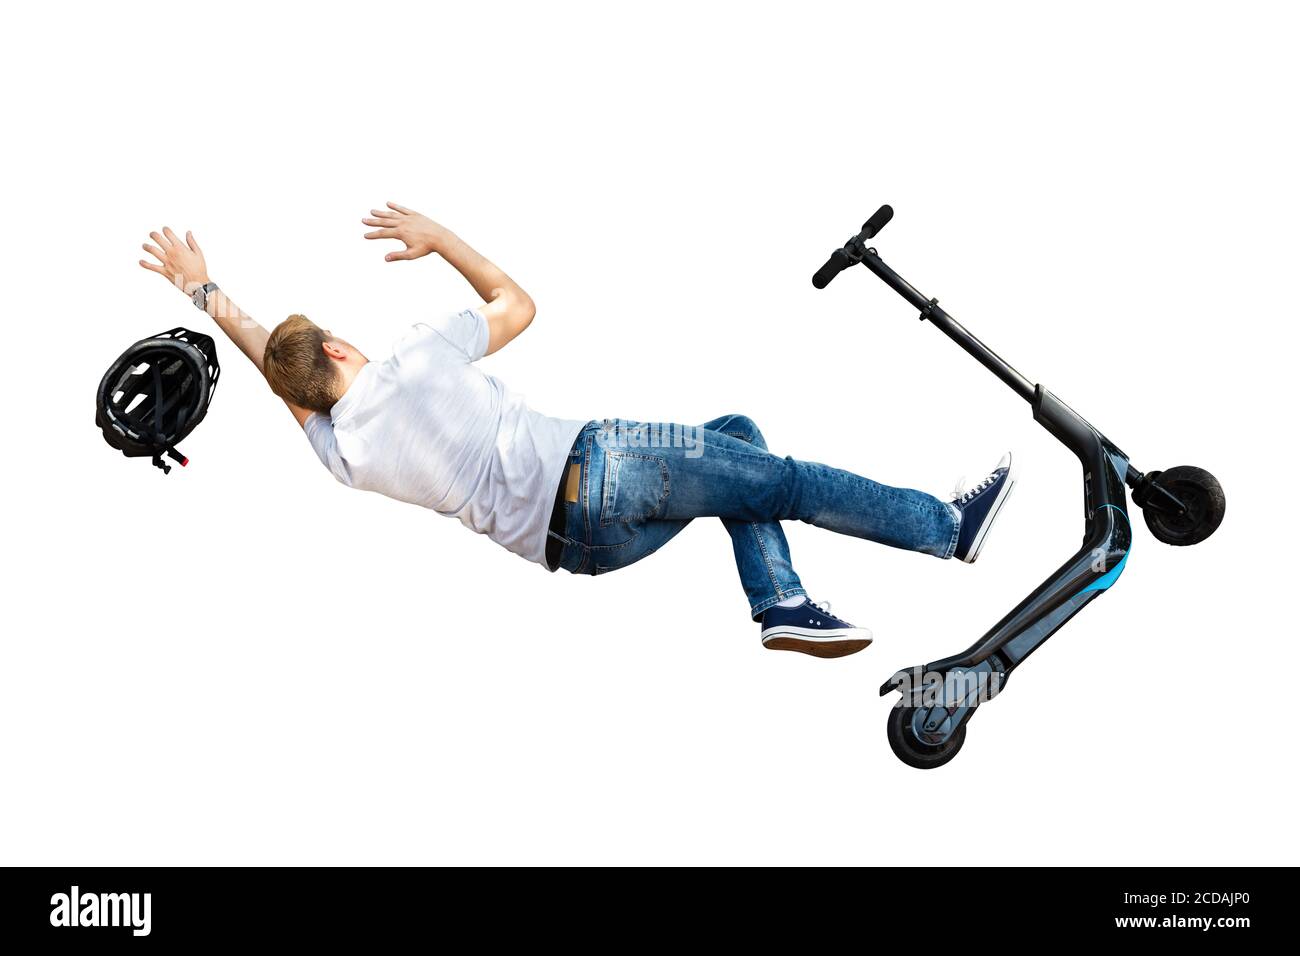 Electric E Scooter Collision Accident. Human Falling Stock Photo - Alamy